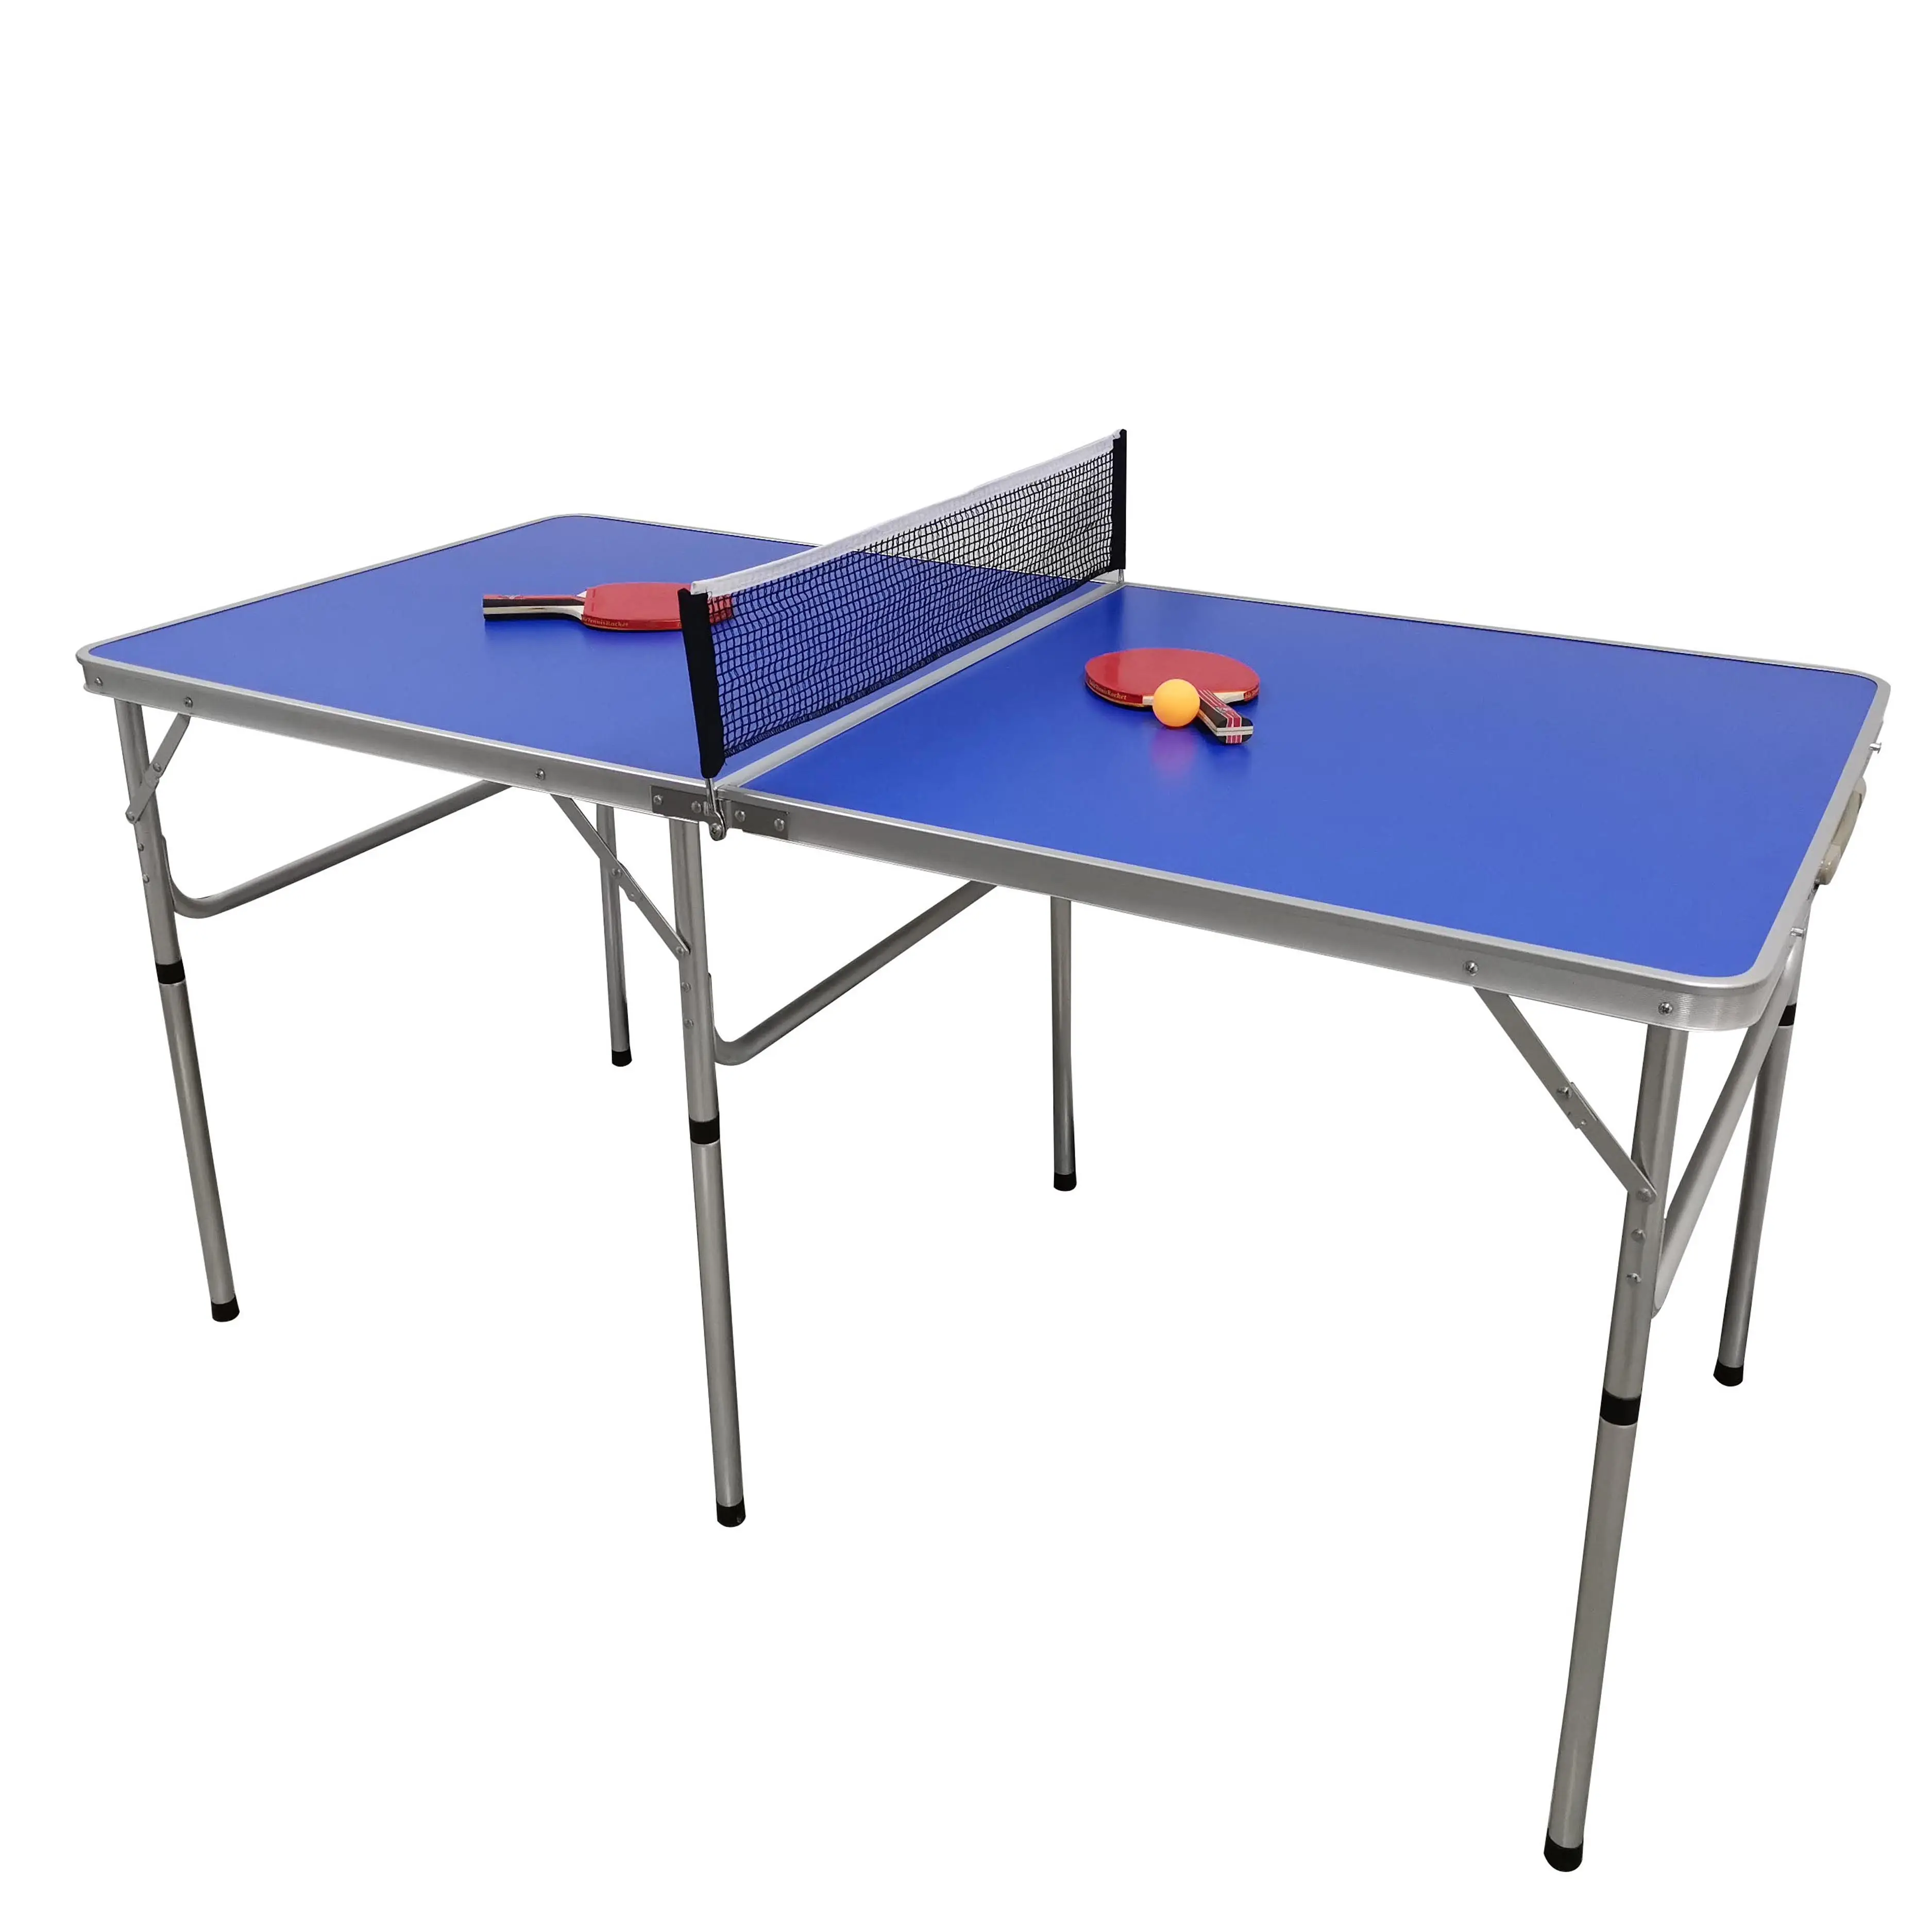 Portable Ping Pong Table, Folding Table Tennis Table Game Set with Net, 2 Table Tennis Paddles and 3 Balls fo